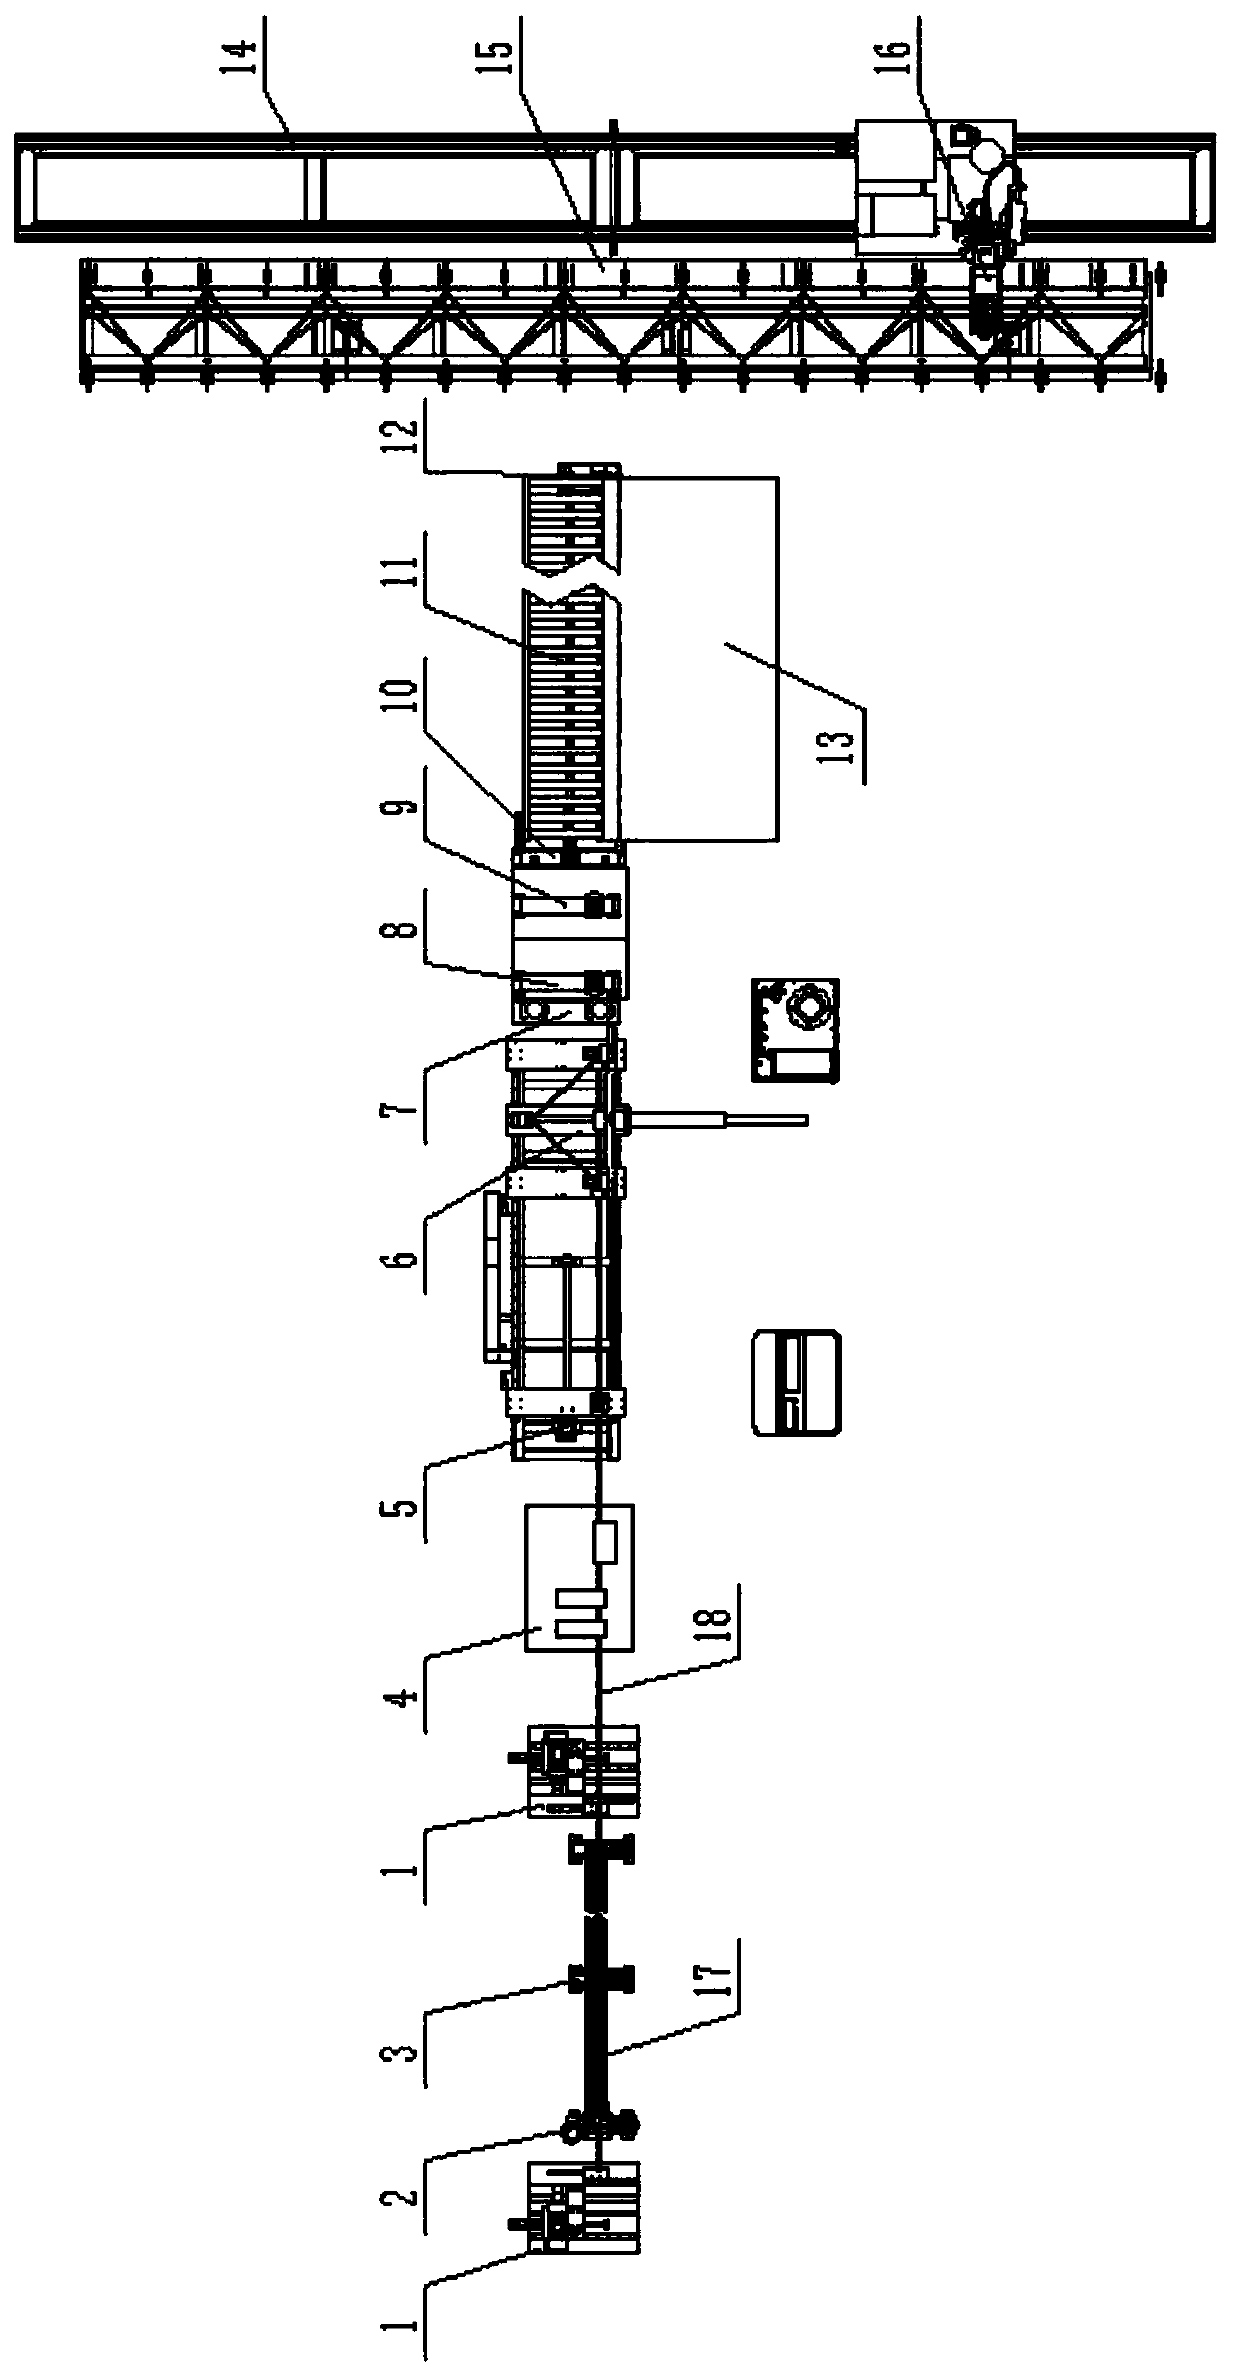 Automatic production system of steel bar welding and production method